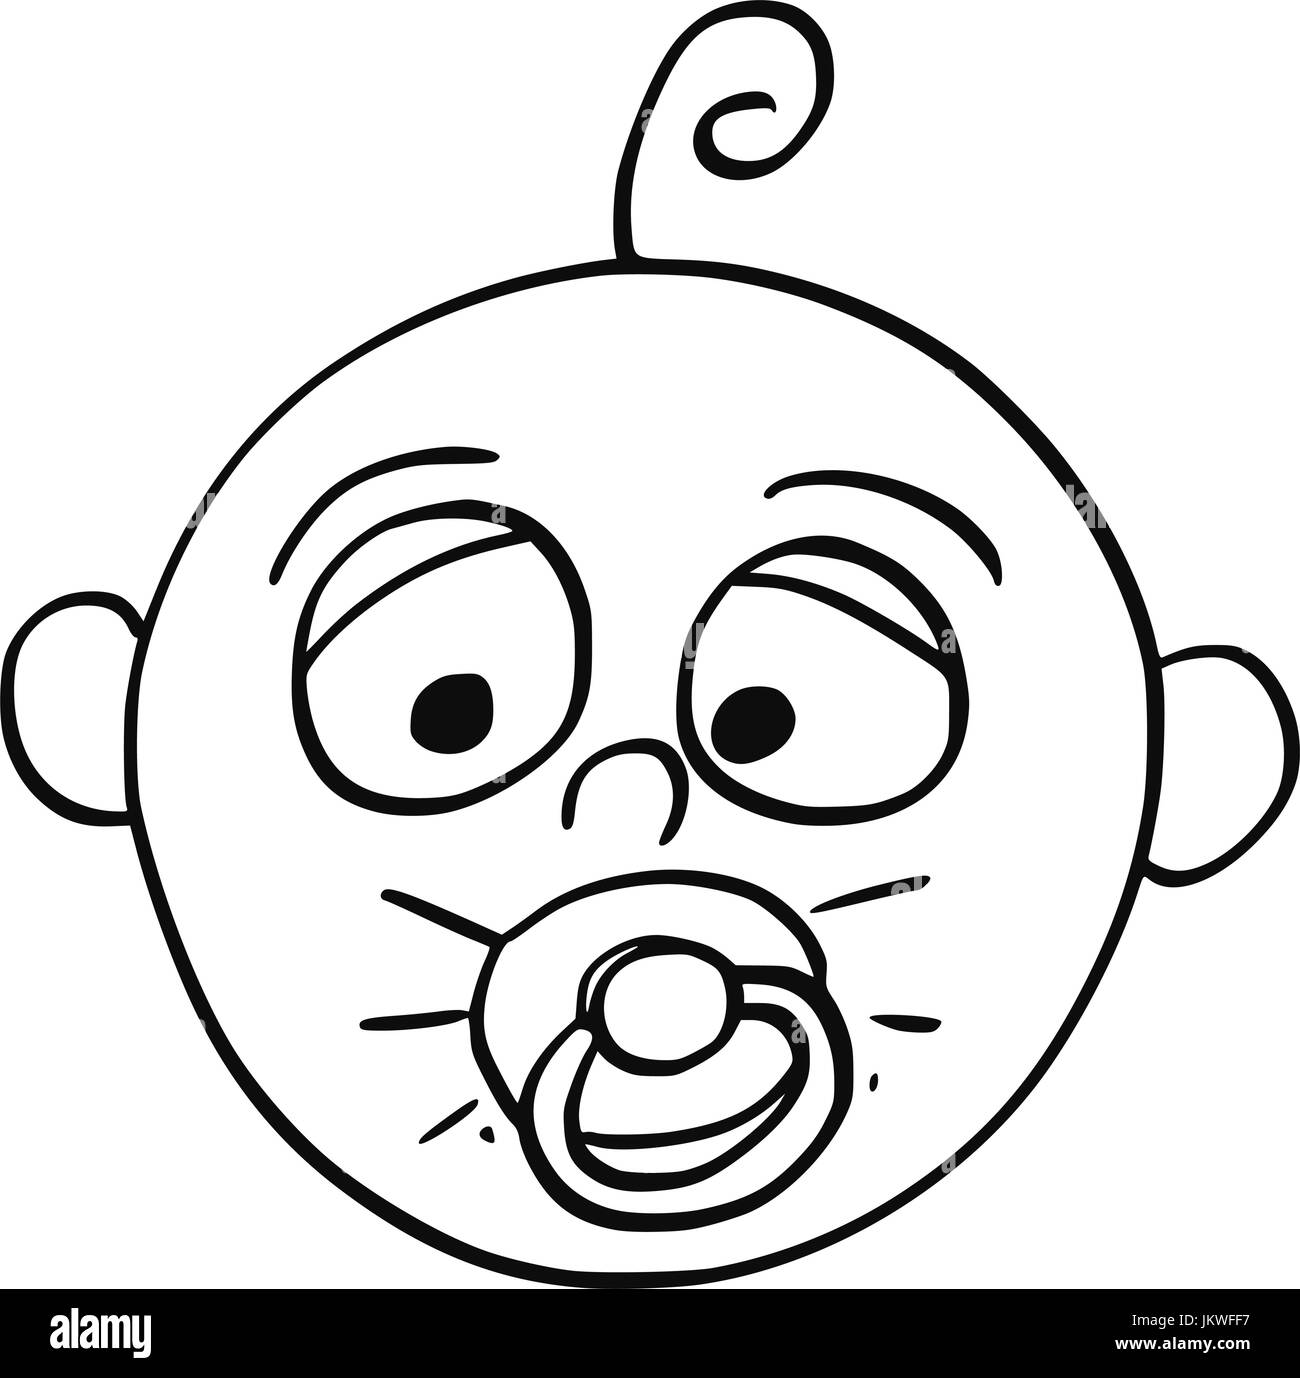 Hand drawing cartoon vector illustration of tired baby with dummy or comforter or pacifier in mouth. Stock Vector